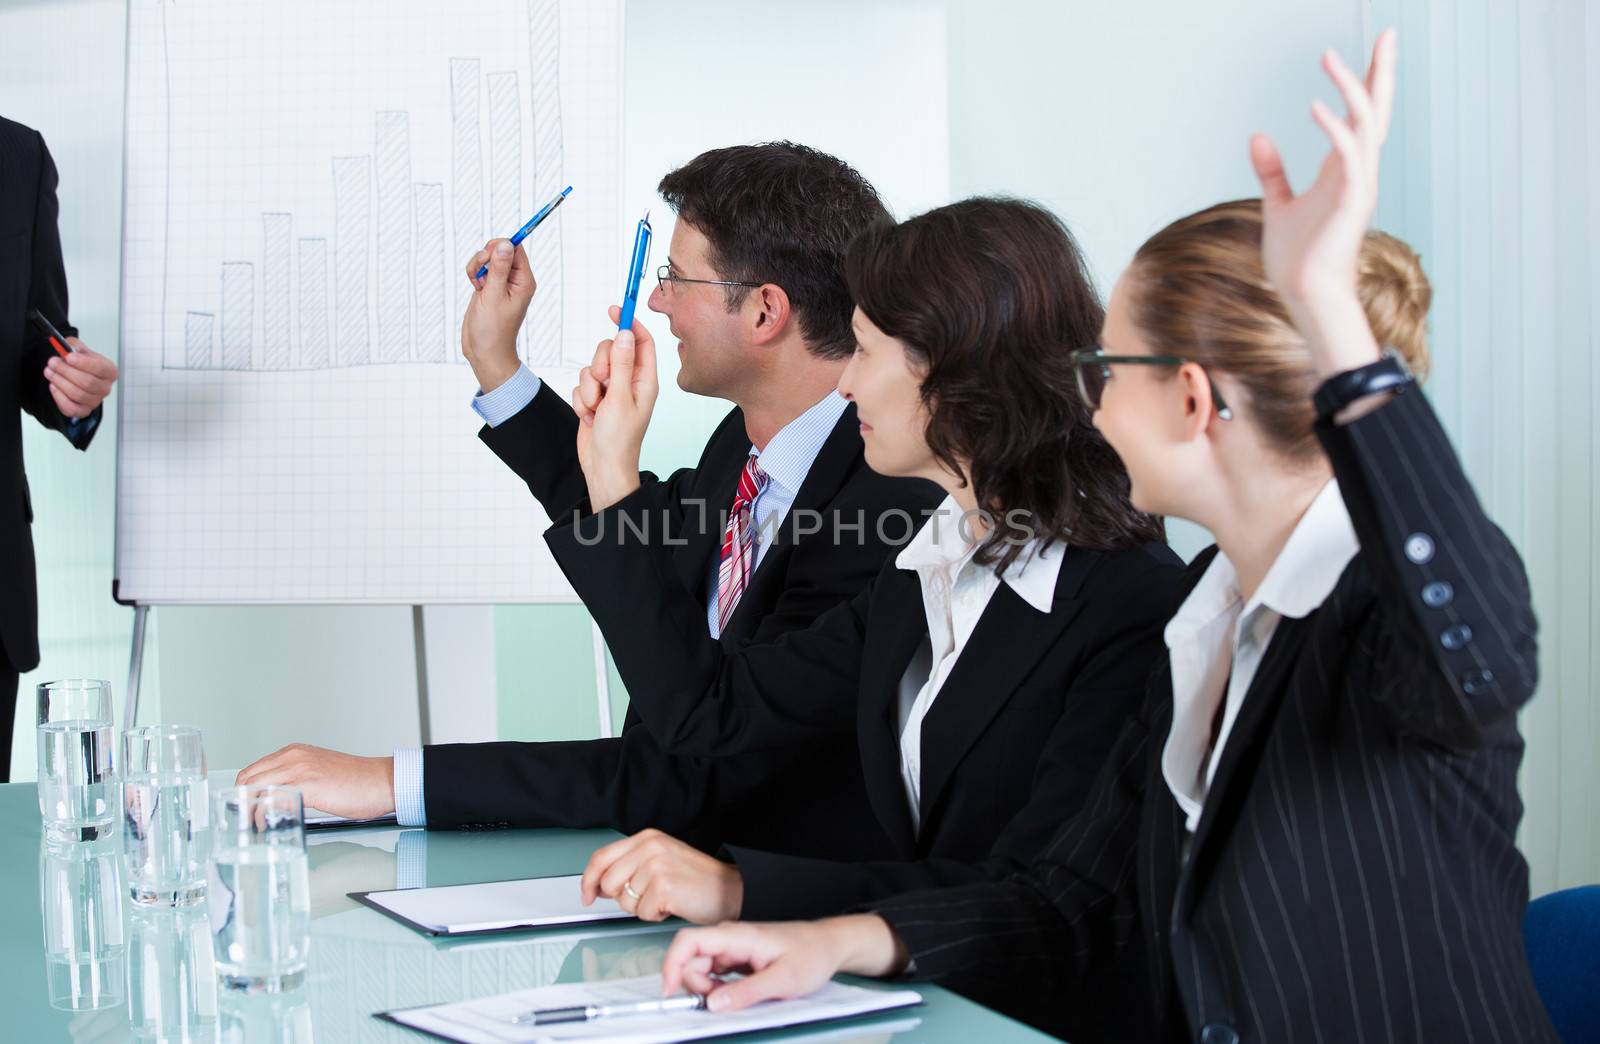 Manager or senior business executive standing in front of a graph giving a presentation to staff or colleagues seated at a table